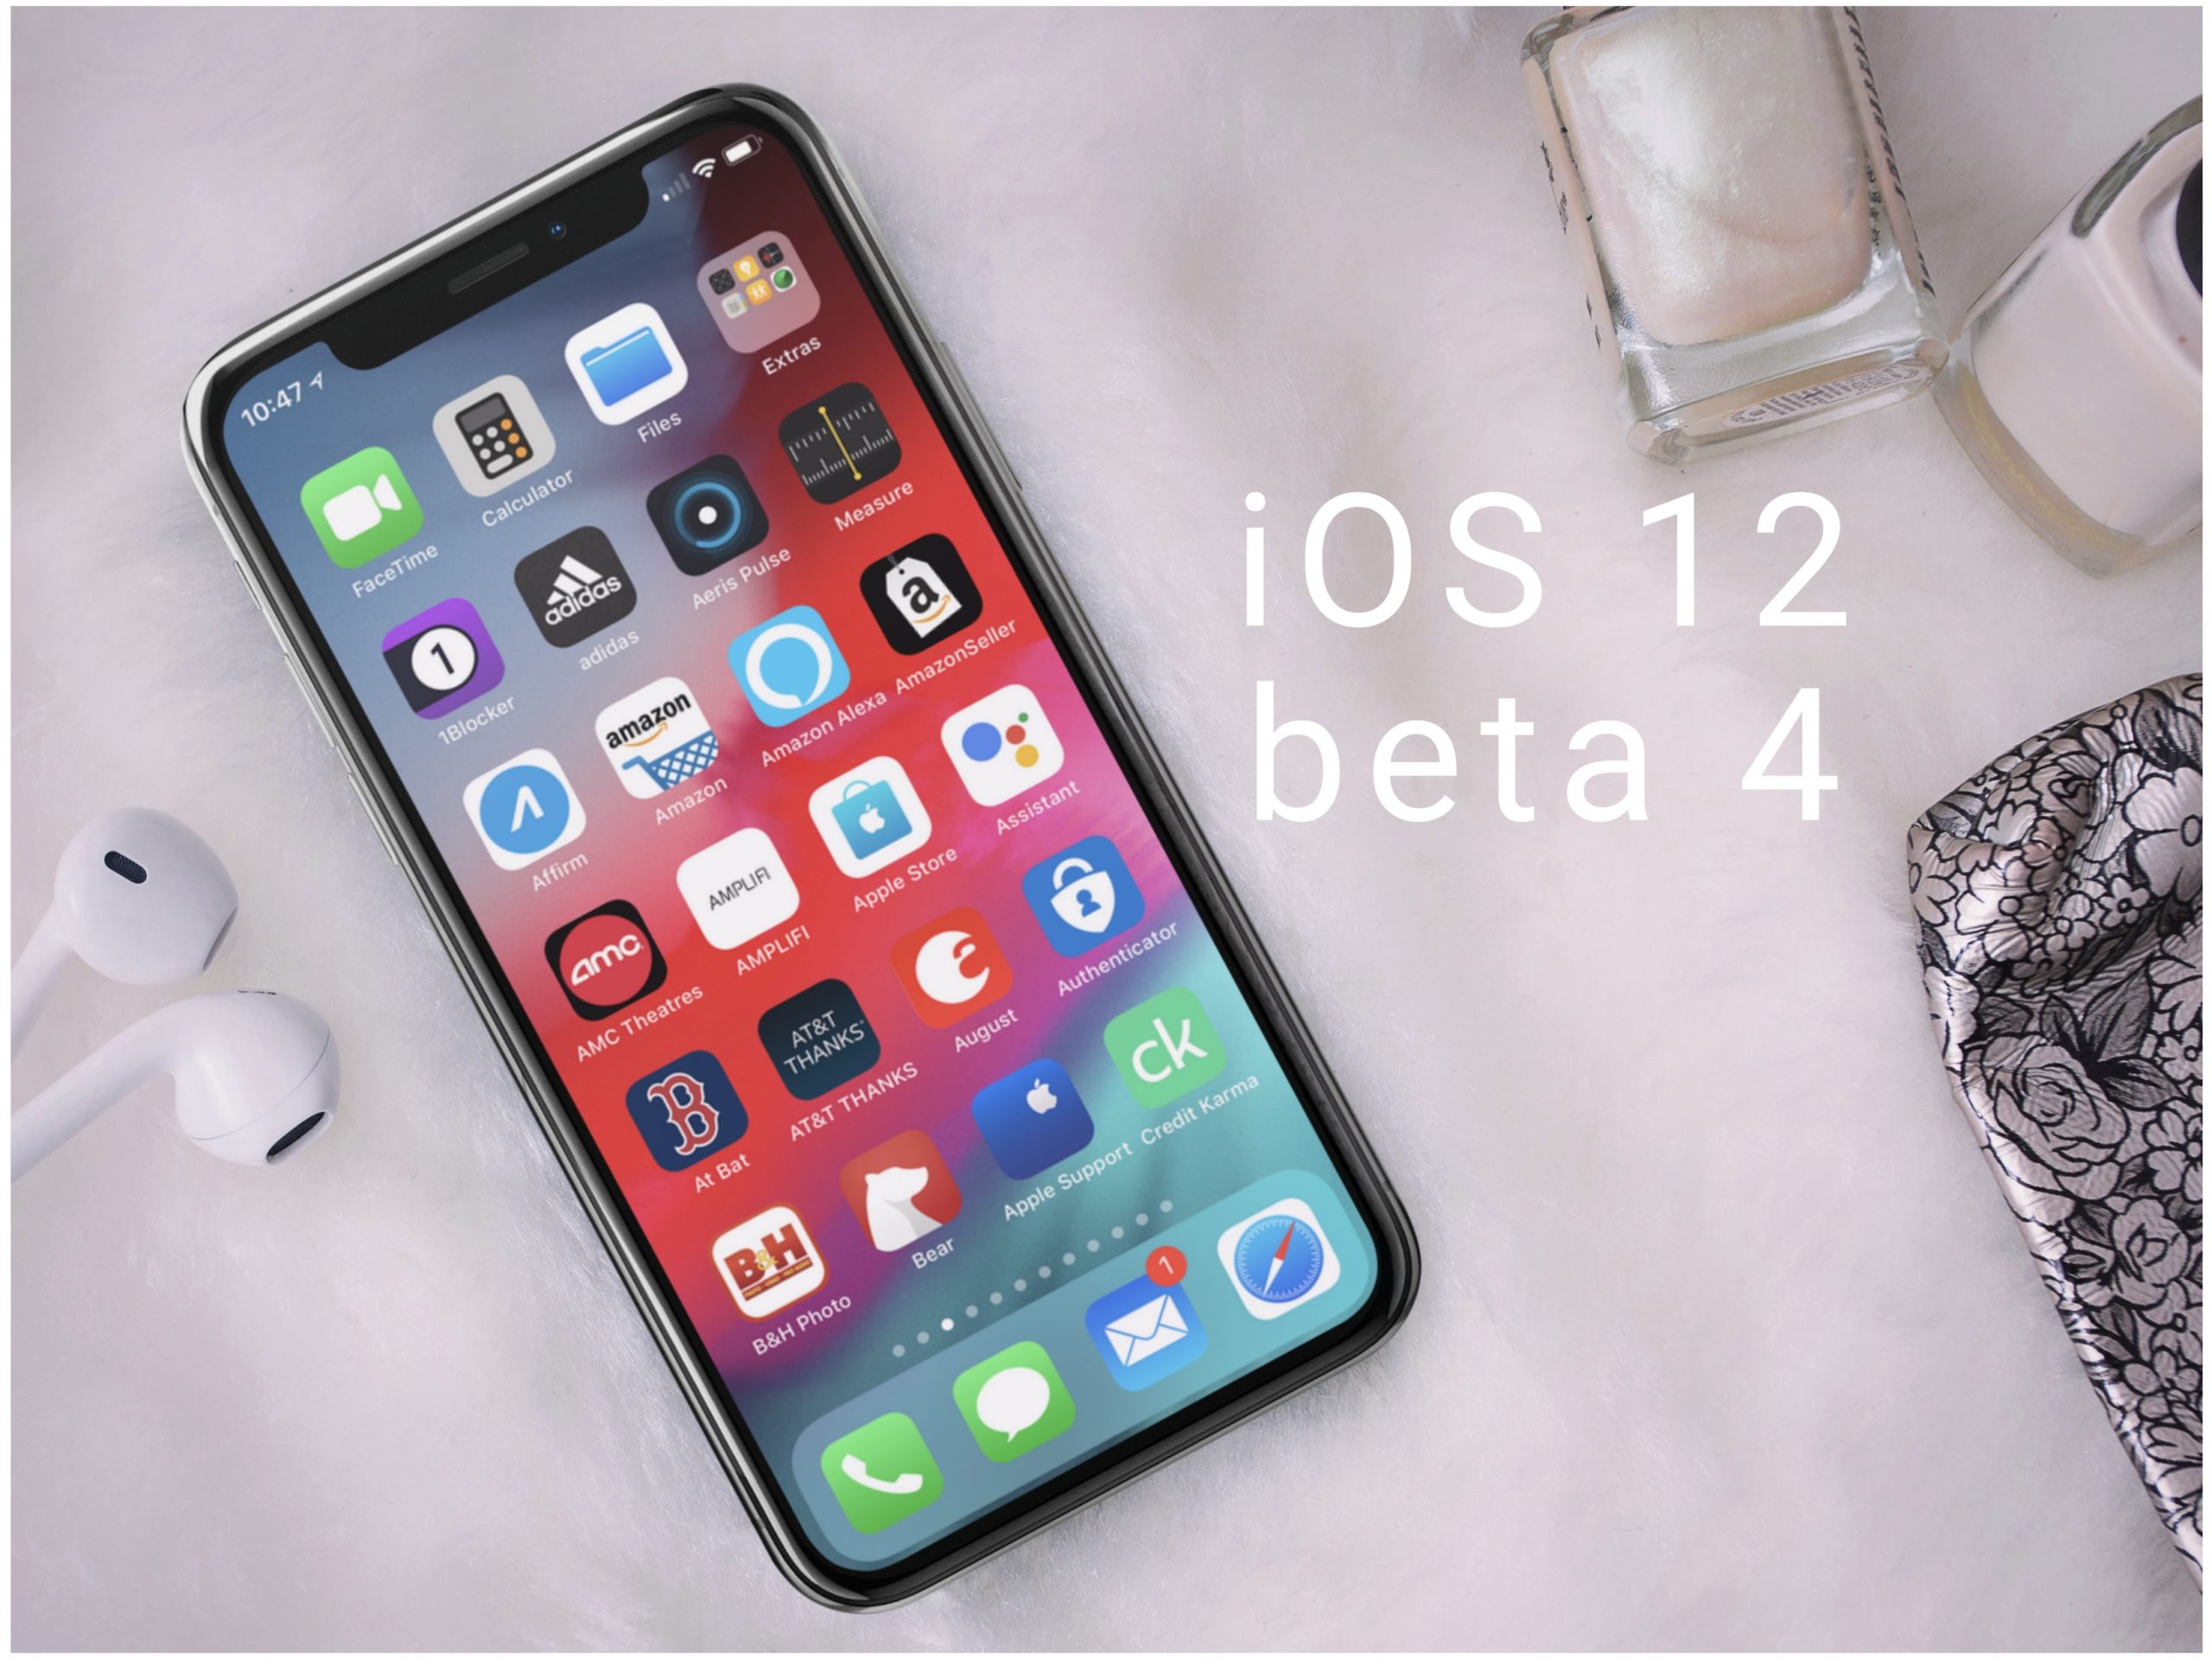 Apple releases iOS 12.1 Beta 4 to Developers